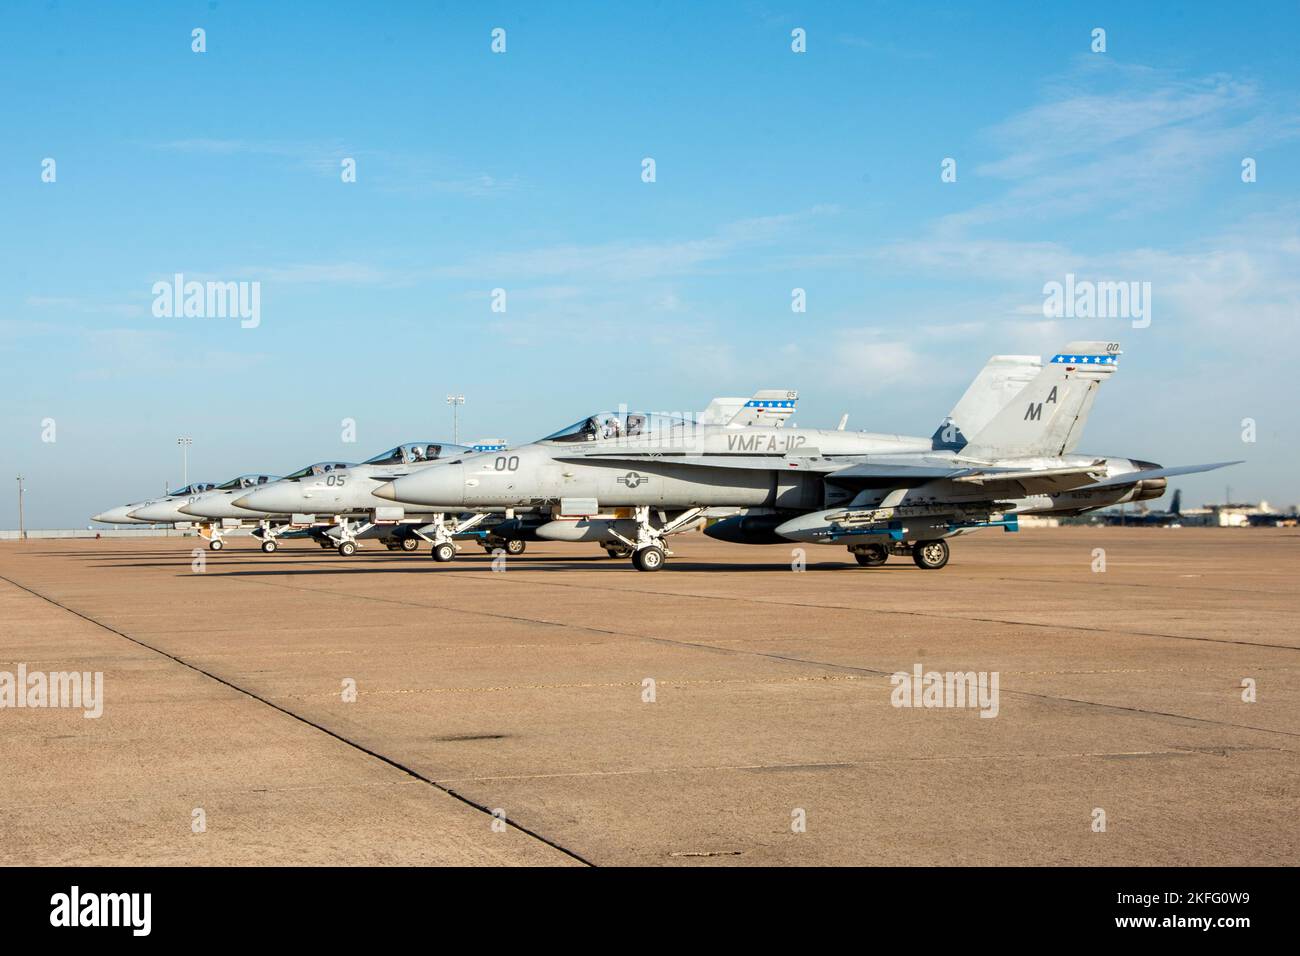 Marines attached to Marine Fighter Attack Squadron (VMFA) 112, Marine Aircraft Group 41, 4th Marine Aircraft Wing, await takeoff in F/A-18C Hornets at Naval Air Station Joint Reserve Base Fort Worth, Texas, Sept. 15, 2022. VMFA-112 is participating in a joint long-range strike exercise with Marine Aerial Refueler Transport Squadron (VMGR) 234, VMFA-225, Marine Fighter Training Squadron (VMFT) 401 and U.S. Air Force 513th Operations Support Squadron. This large force exercise demonstrates MAG-41's ability to project long-range strike capability and integrate with the Marine Corps' active compon Stock Photo